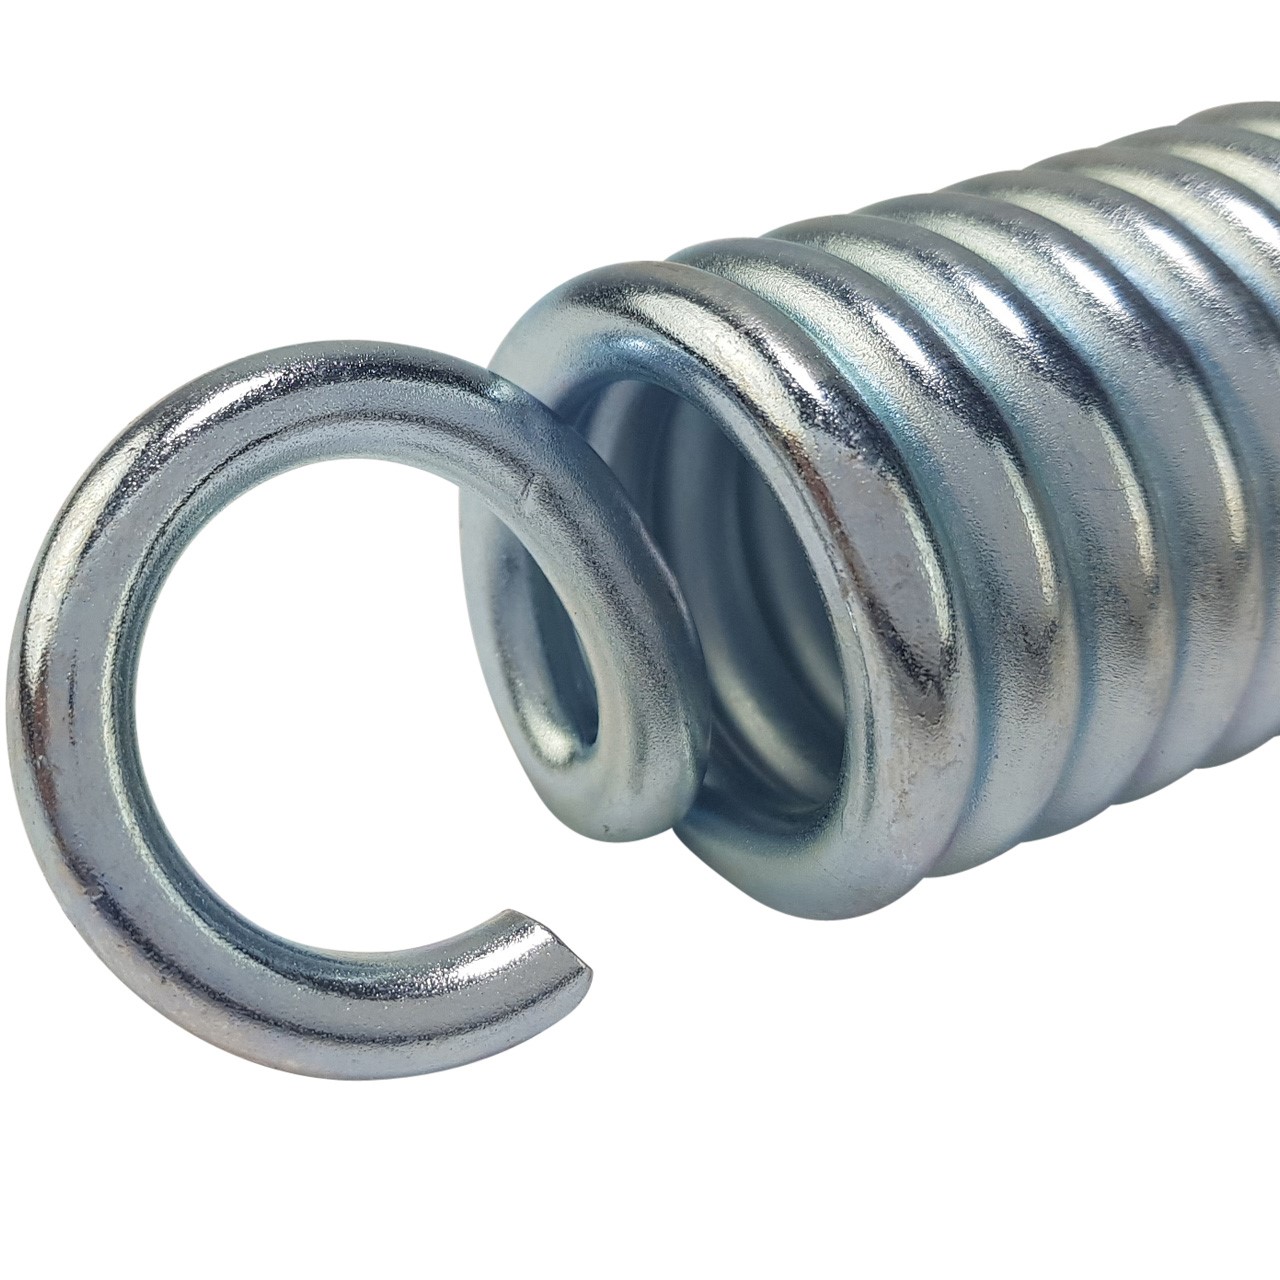 Tunturi Punch Bag Spring Extra Heavy for Bags up to 100 kg